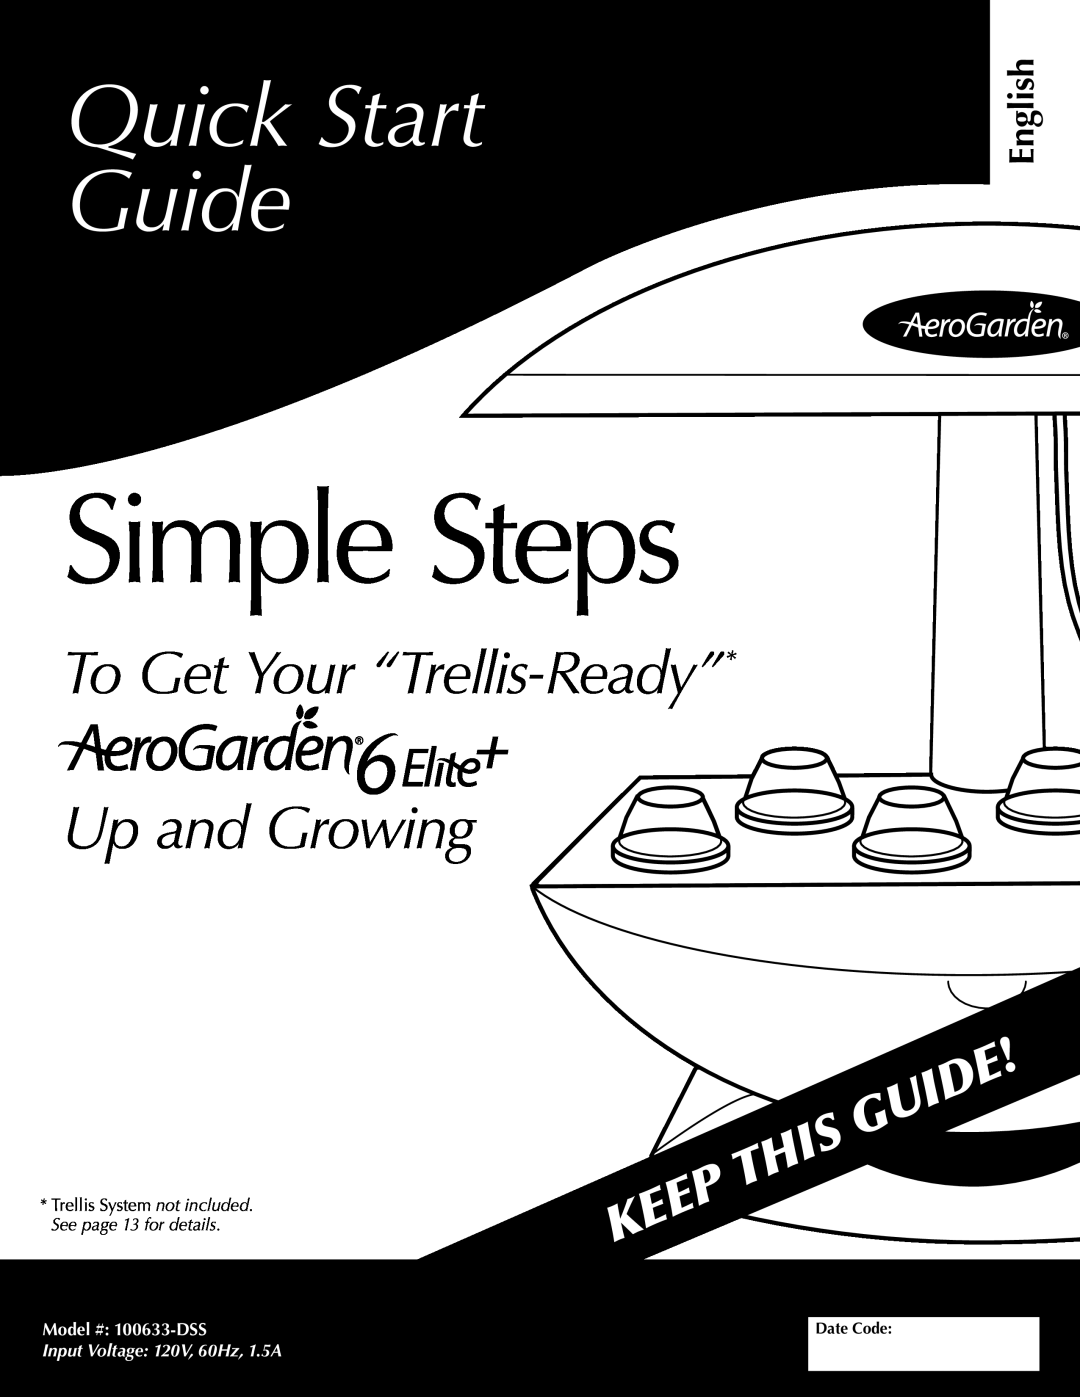 AeroGarden 200633, 100633 quick start Simple Steps, Quick Start Guide, To Get Your “Trellis-Ready” Up and Growing, English 